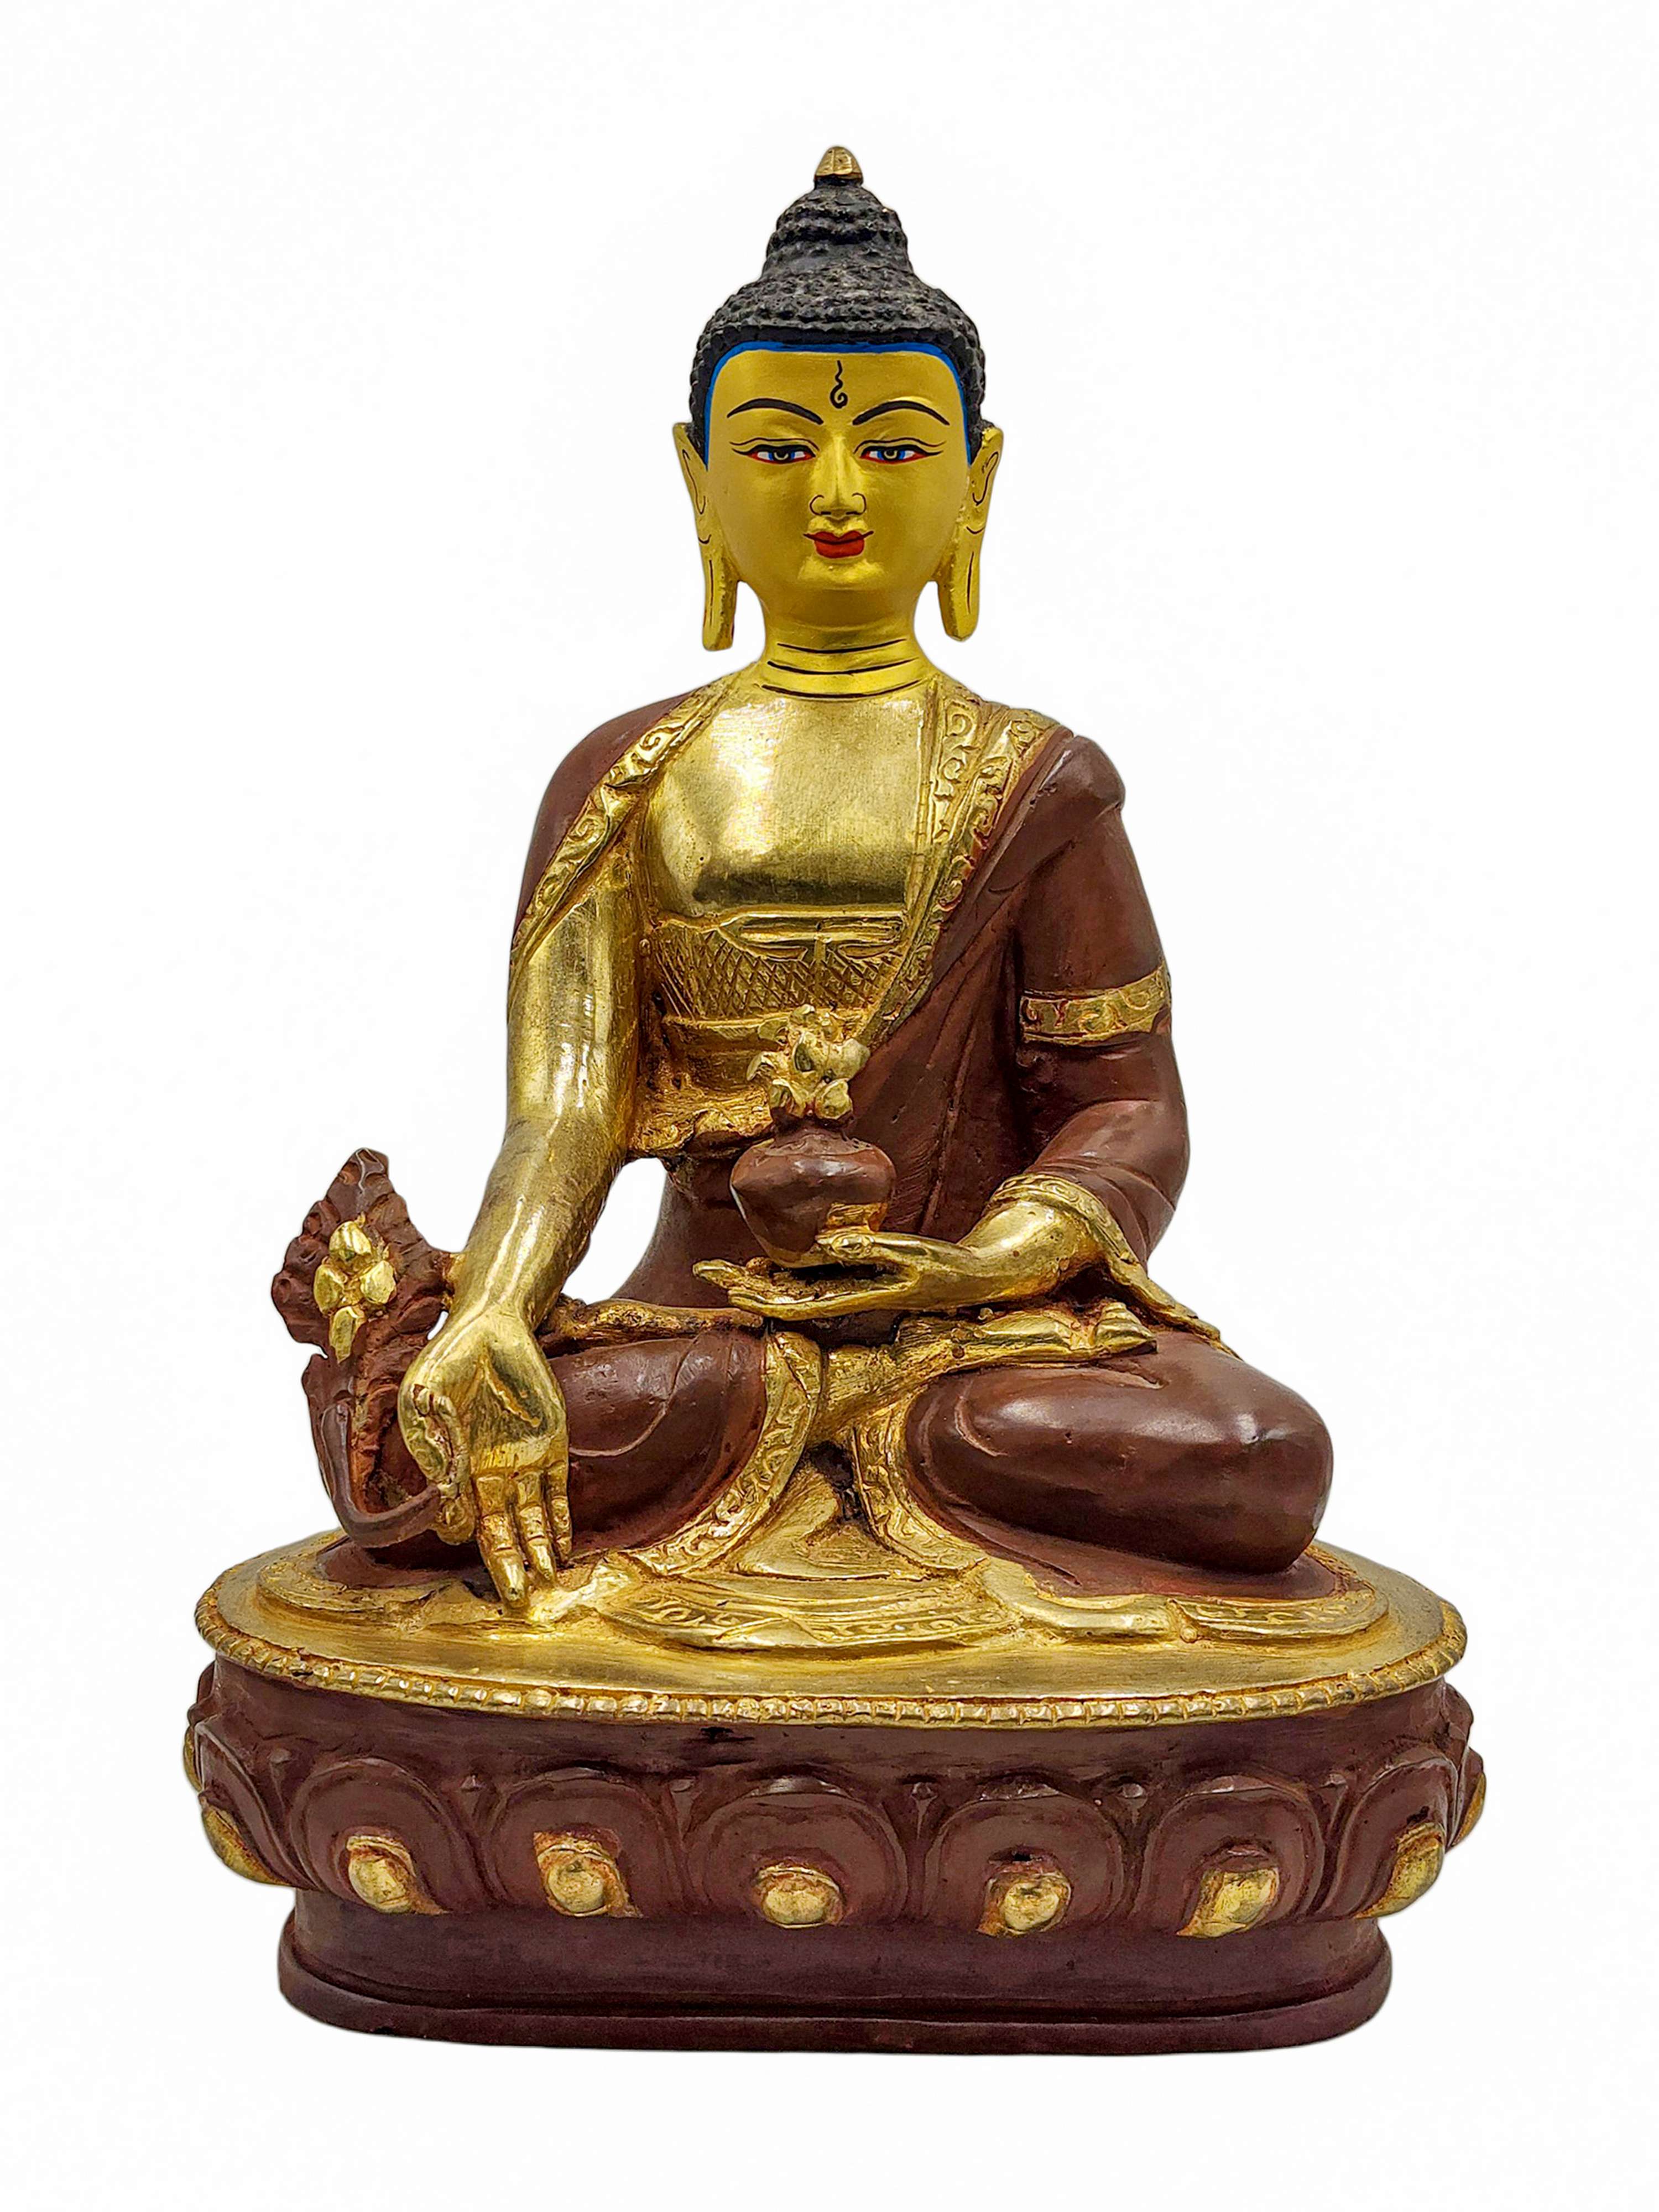 best Price, medicine Buddha, Buddhist Handmade Statue, partly Gold Plated, Wtih face Painted, For A Gift, Altars And Buddhist Ritual